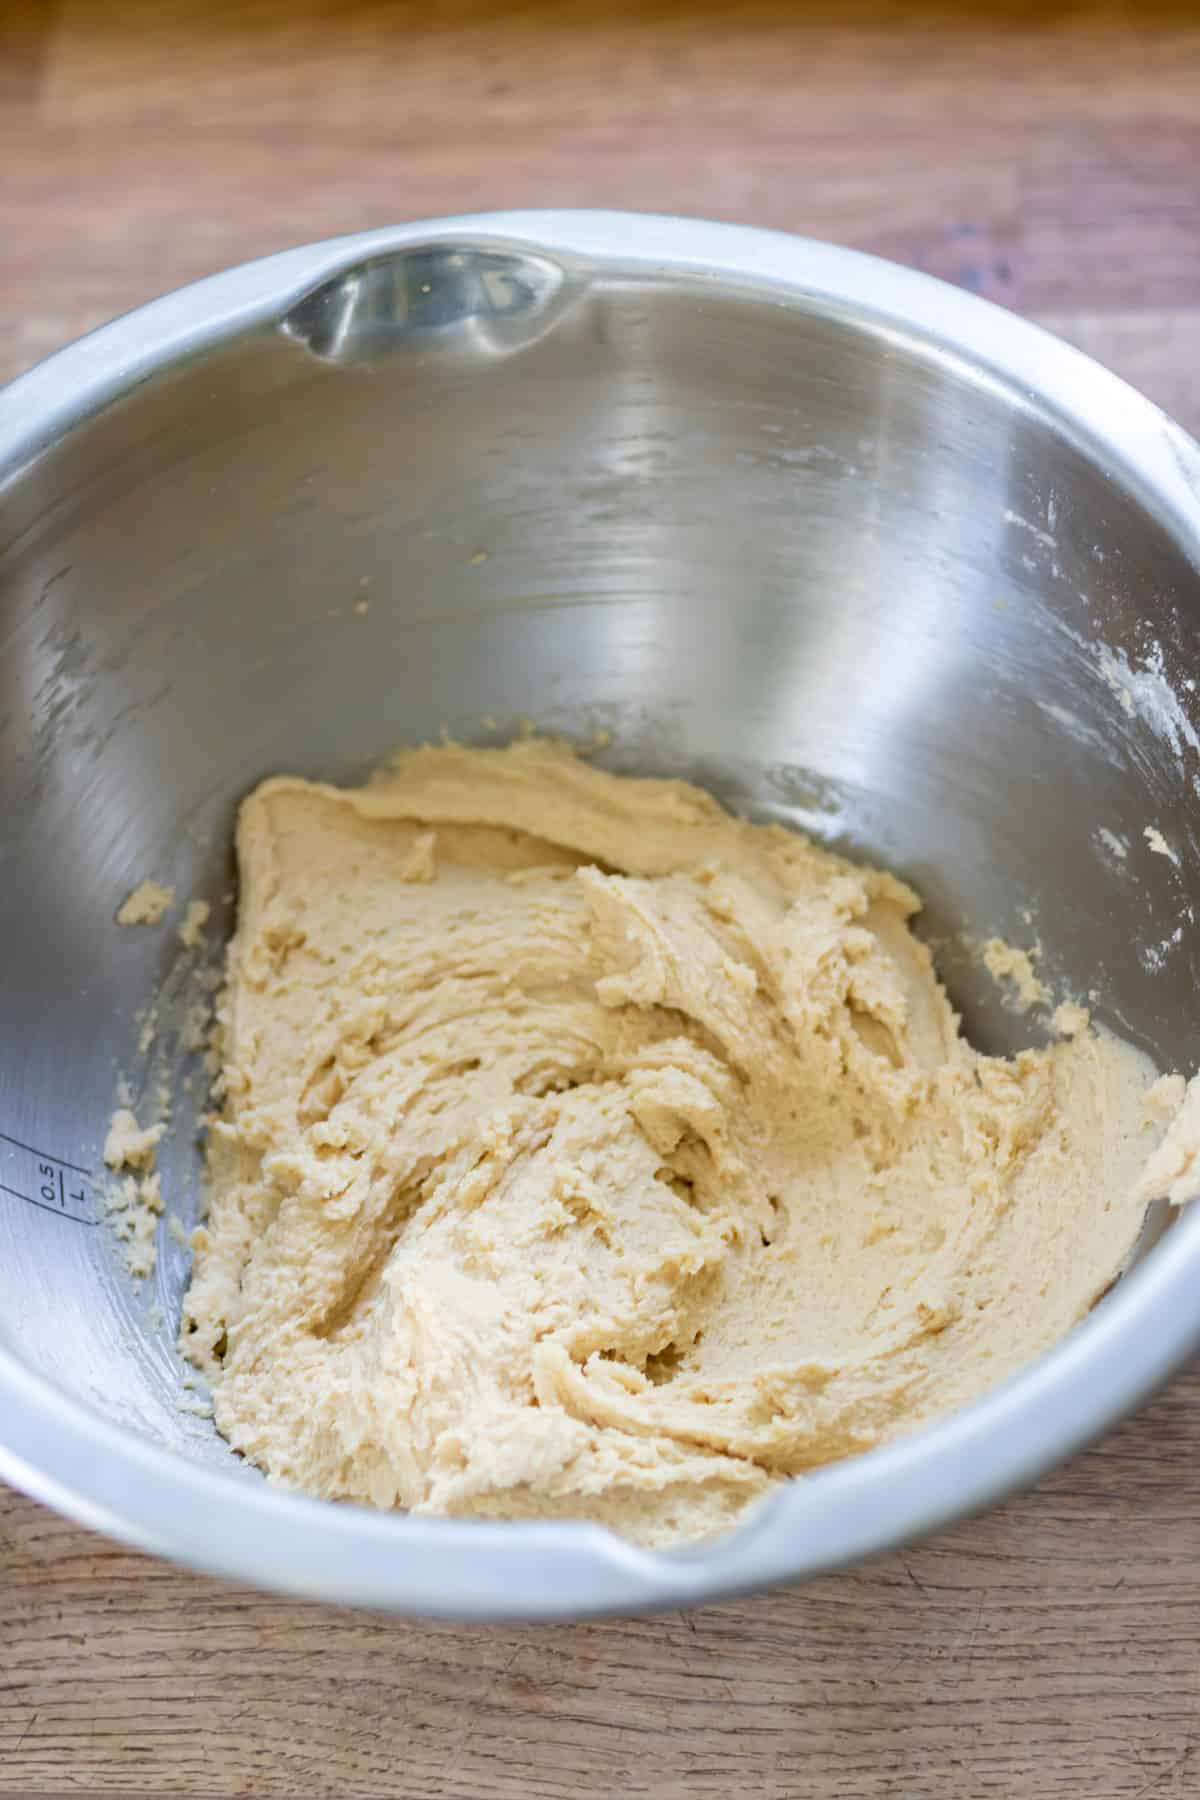 Mixing the flour into the batter.